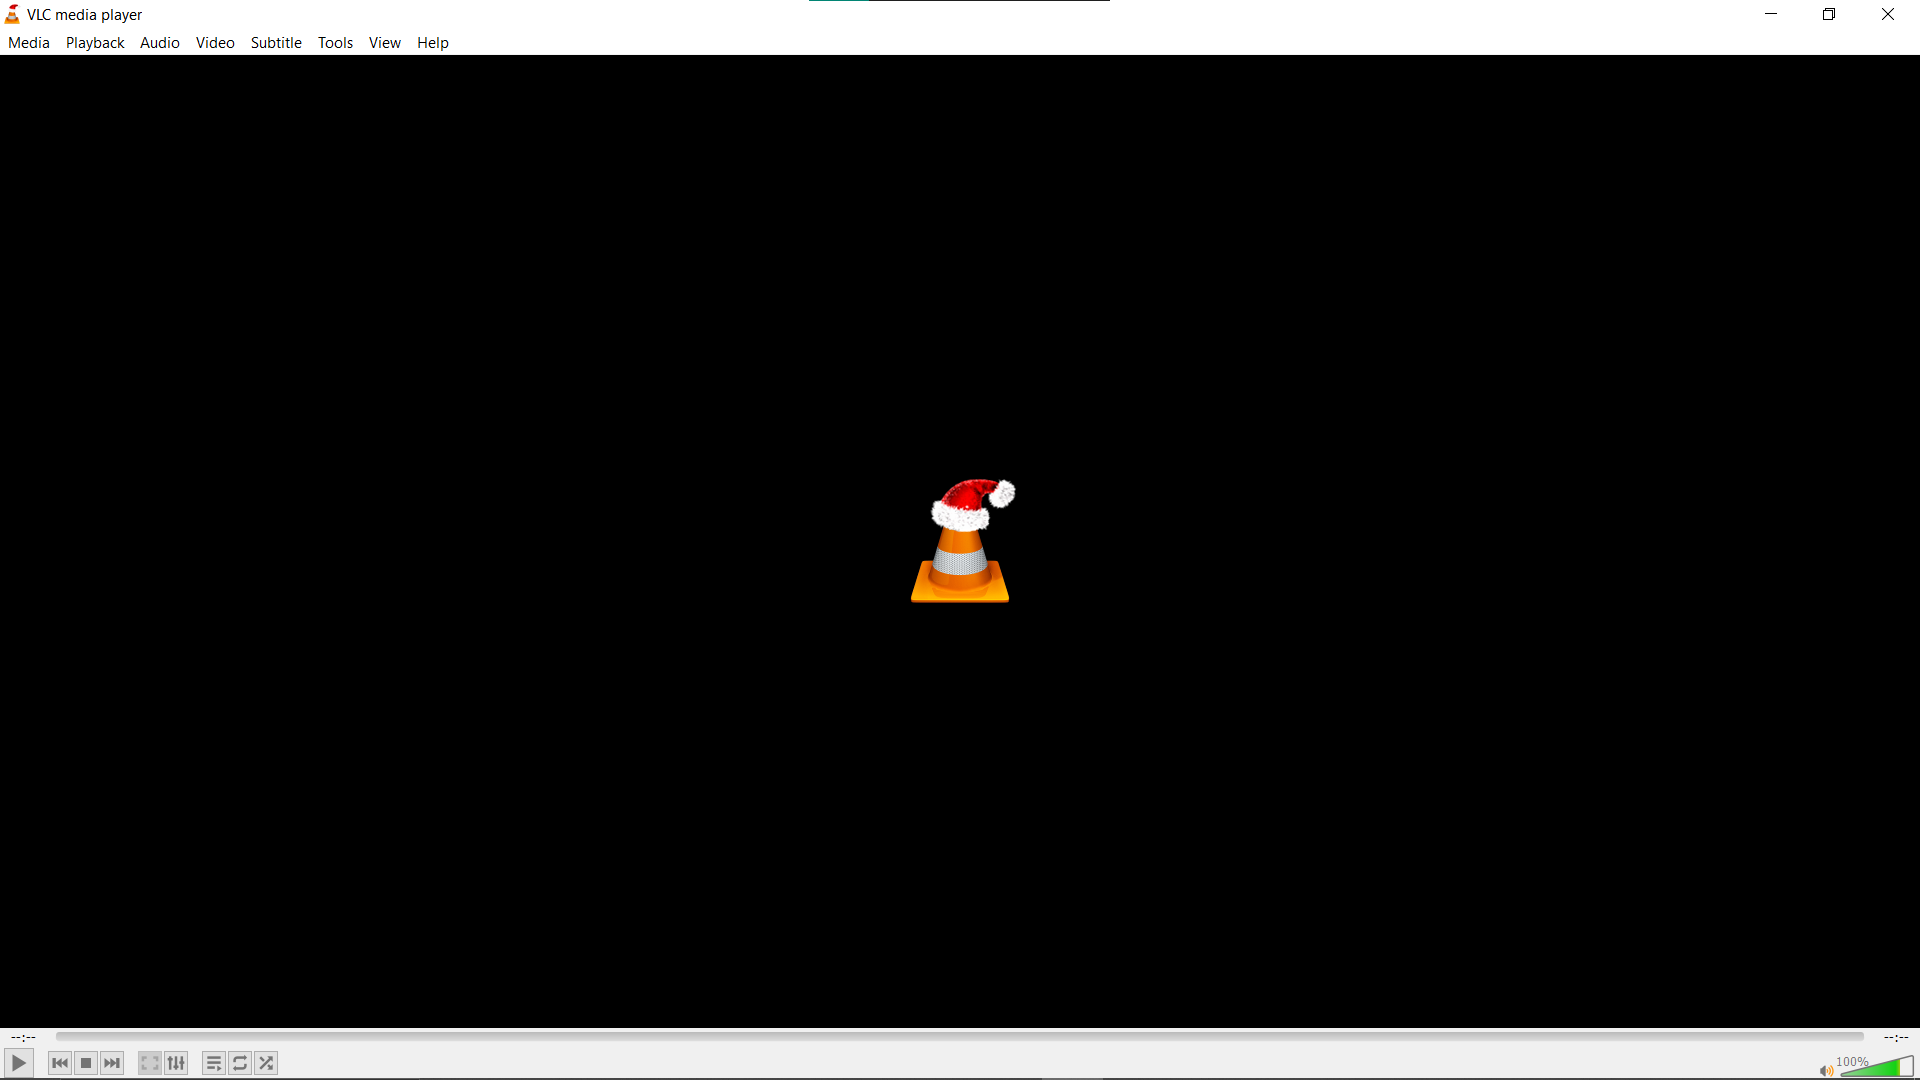 How To Convert Videos to Different Formats Using VLC: Step 1